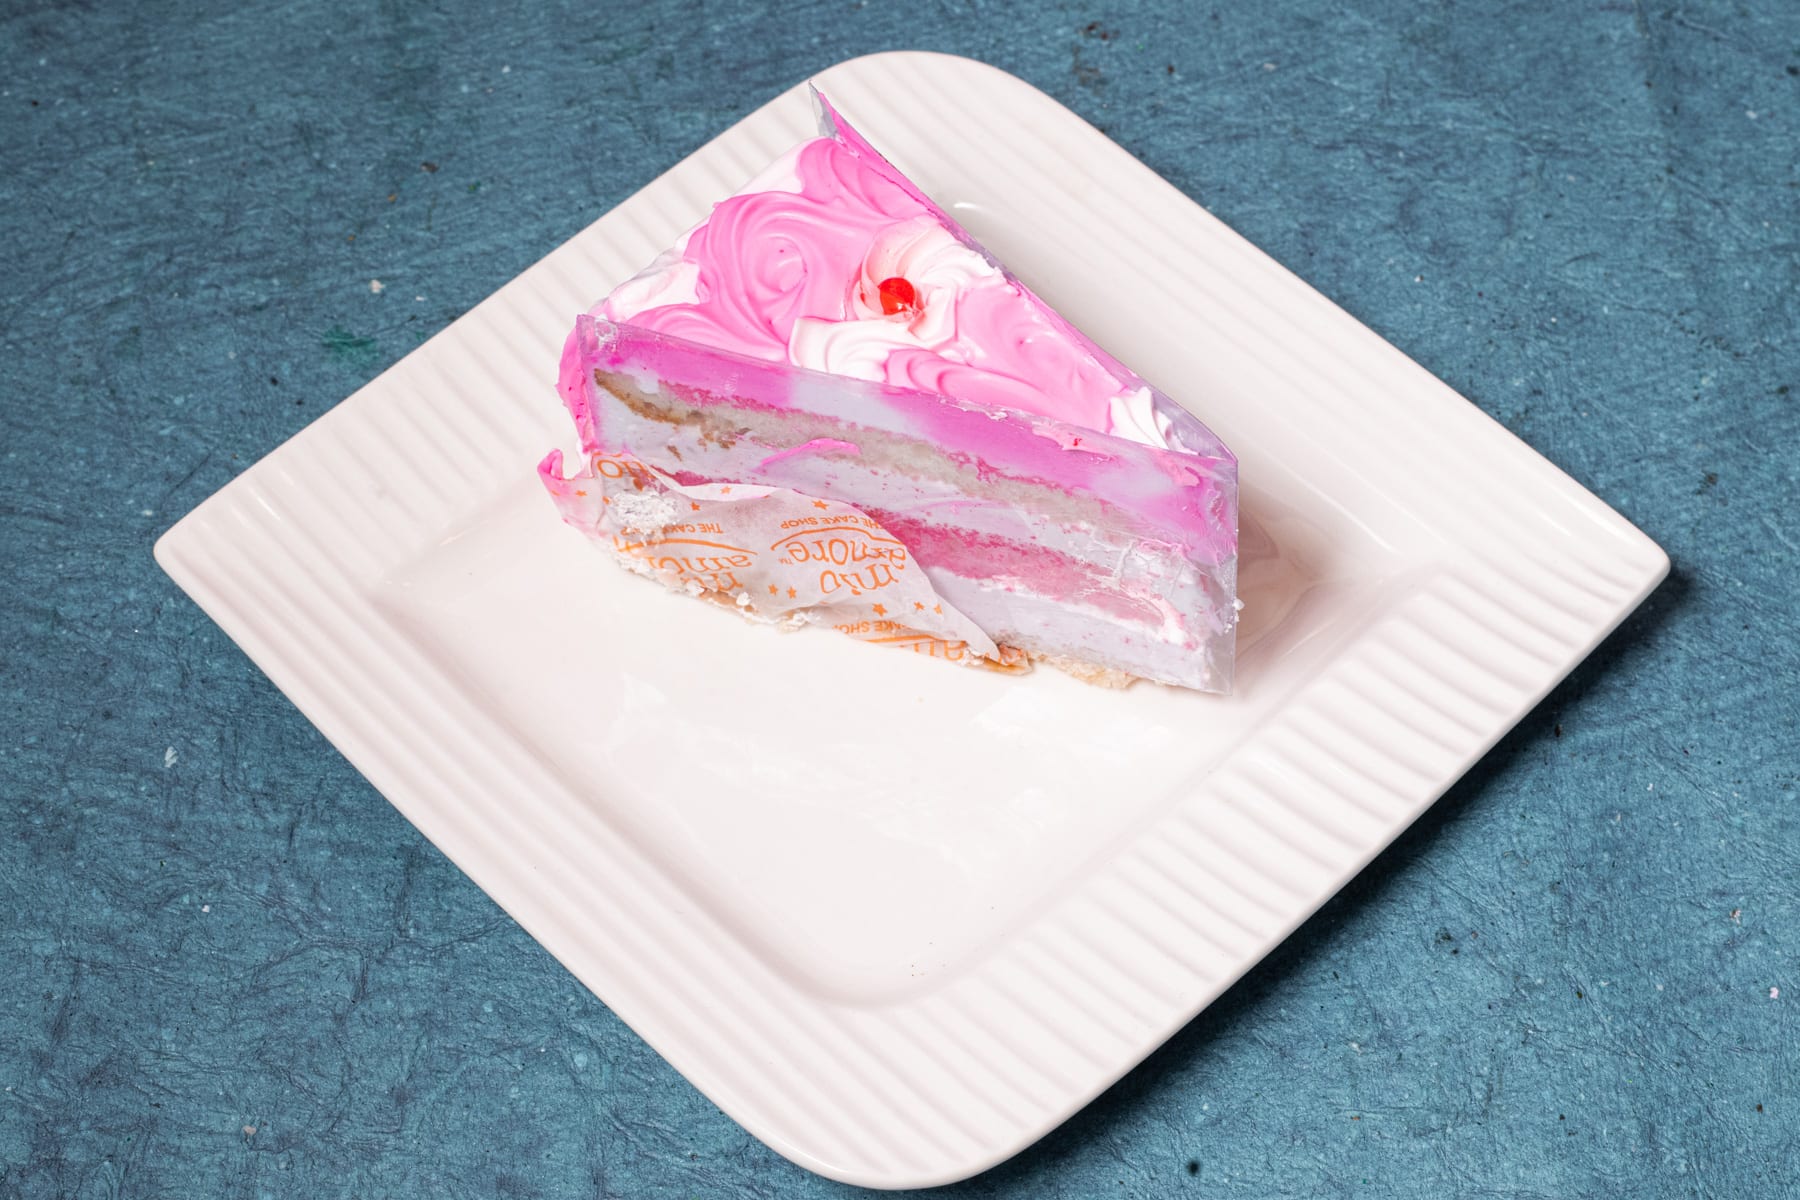 Top Mio Amore Cake Shops in Budge Budge - Best Mio Amore Cake Shops Kolkata  - Justdial